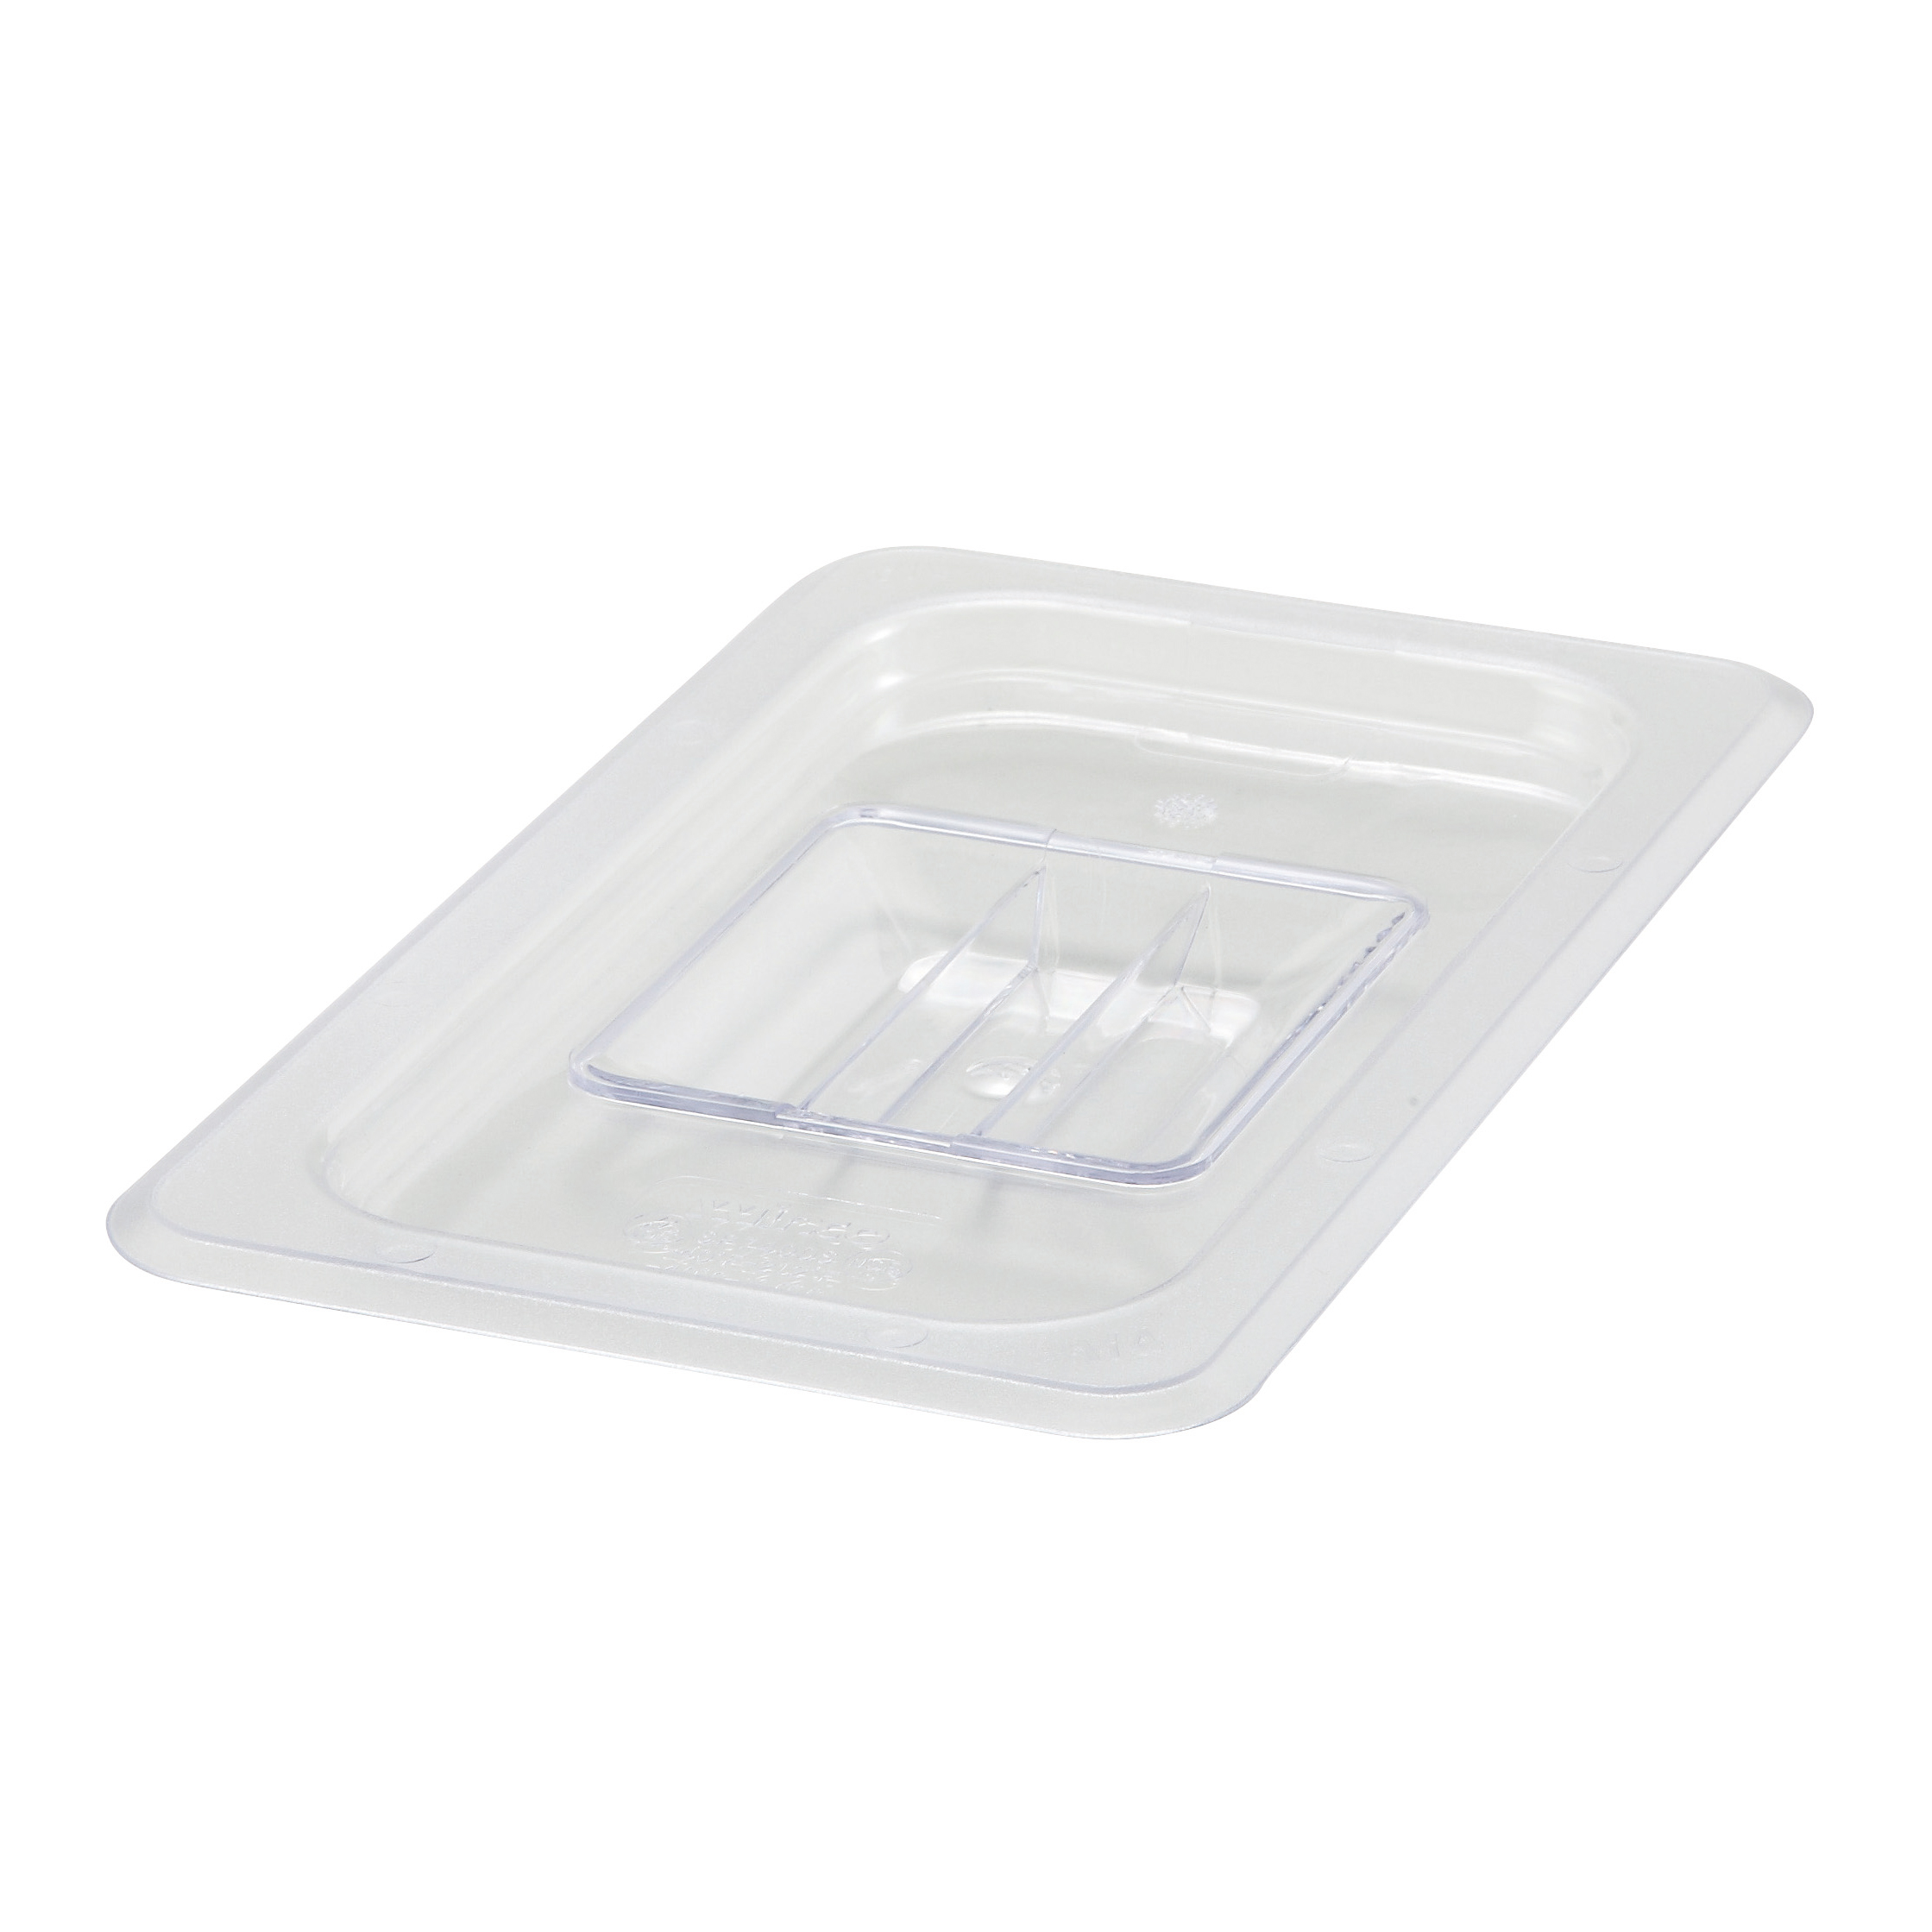 Winco SP7400S 1/4 Size Poly Ware Polycarbonate Food Pan Cover with Handle, Solid